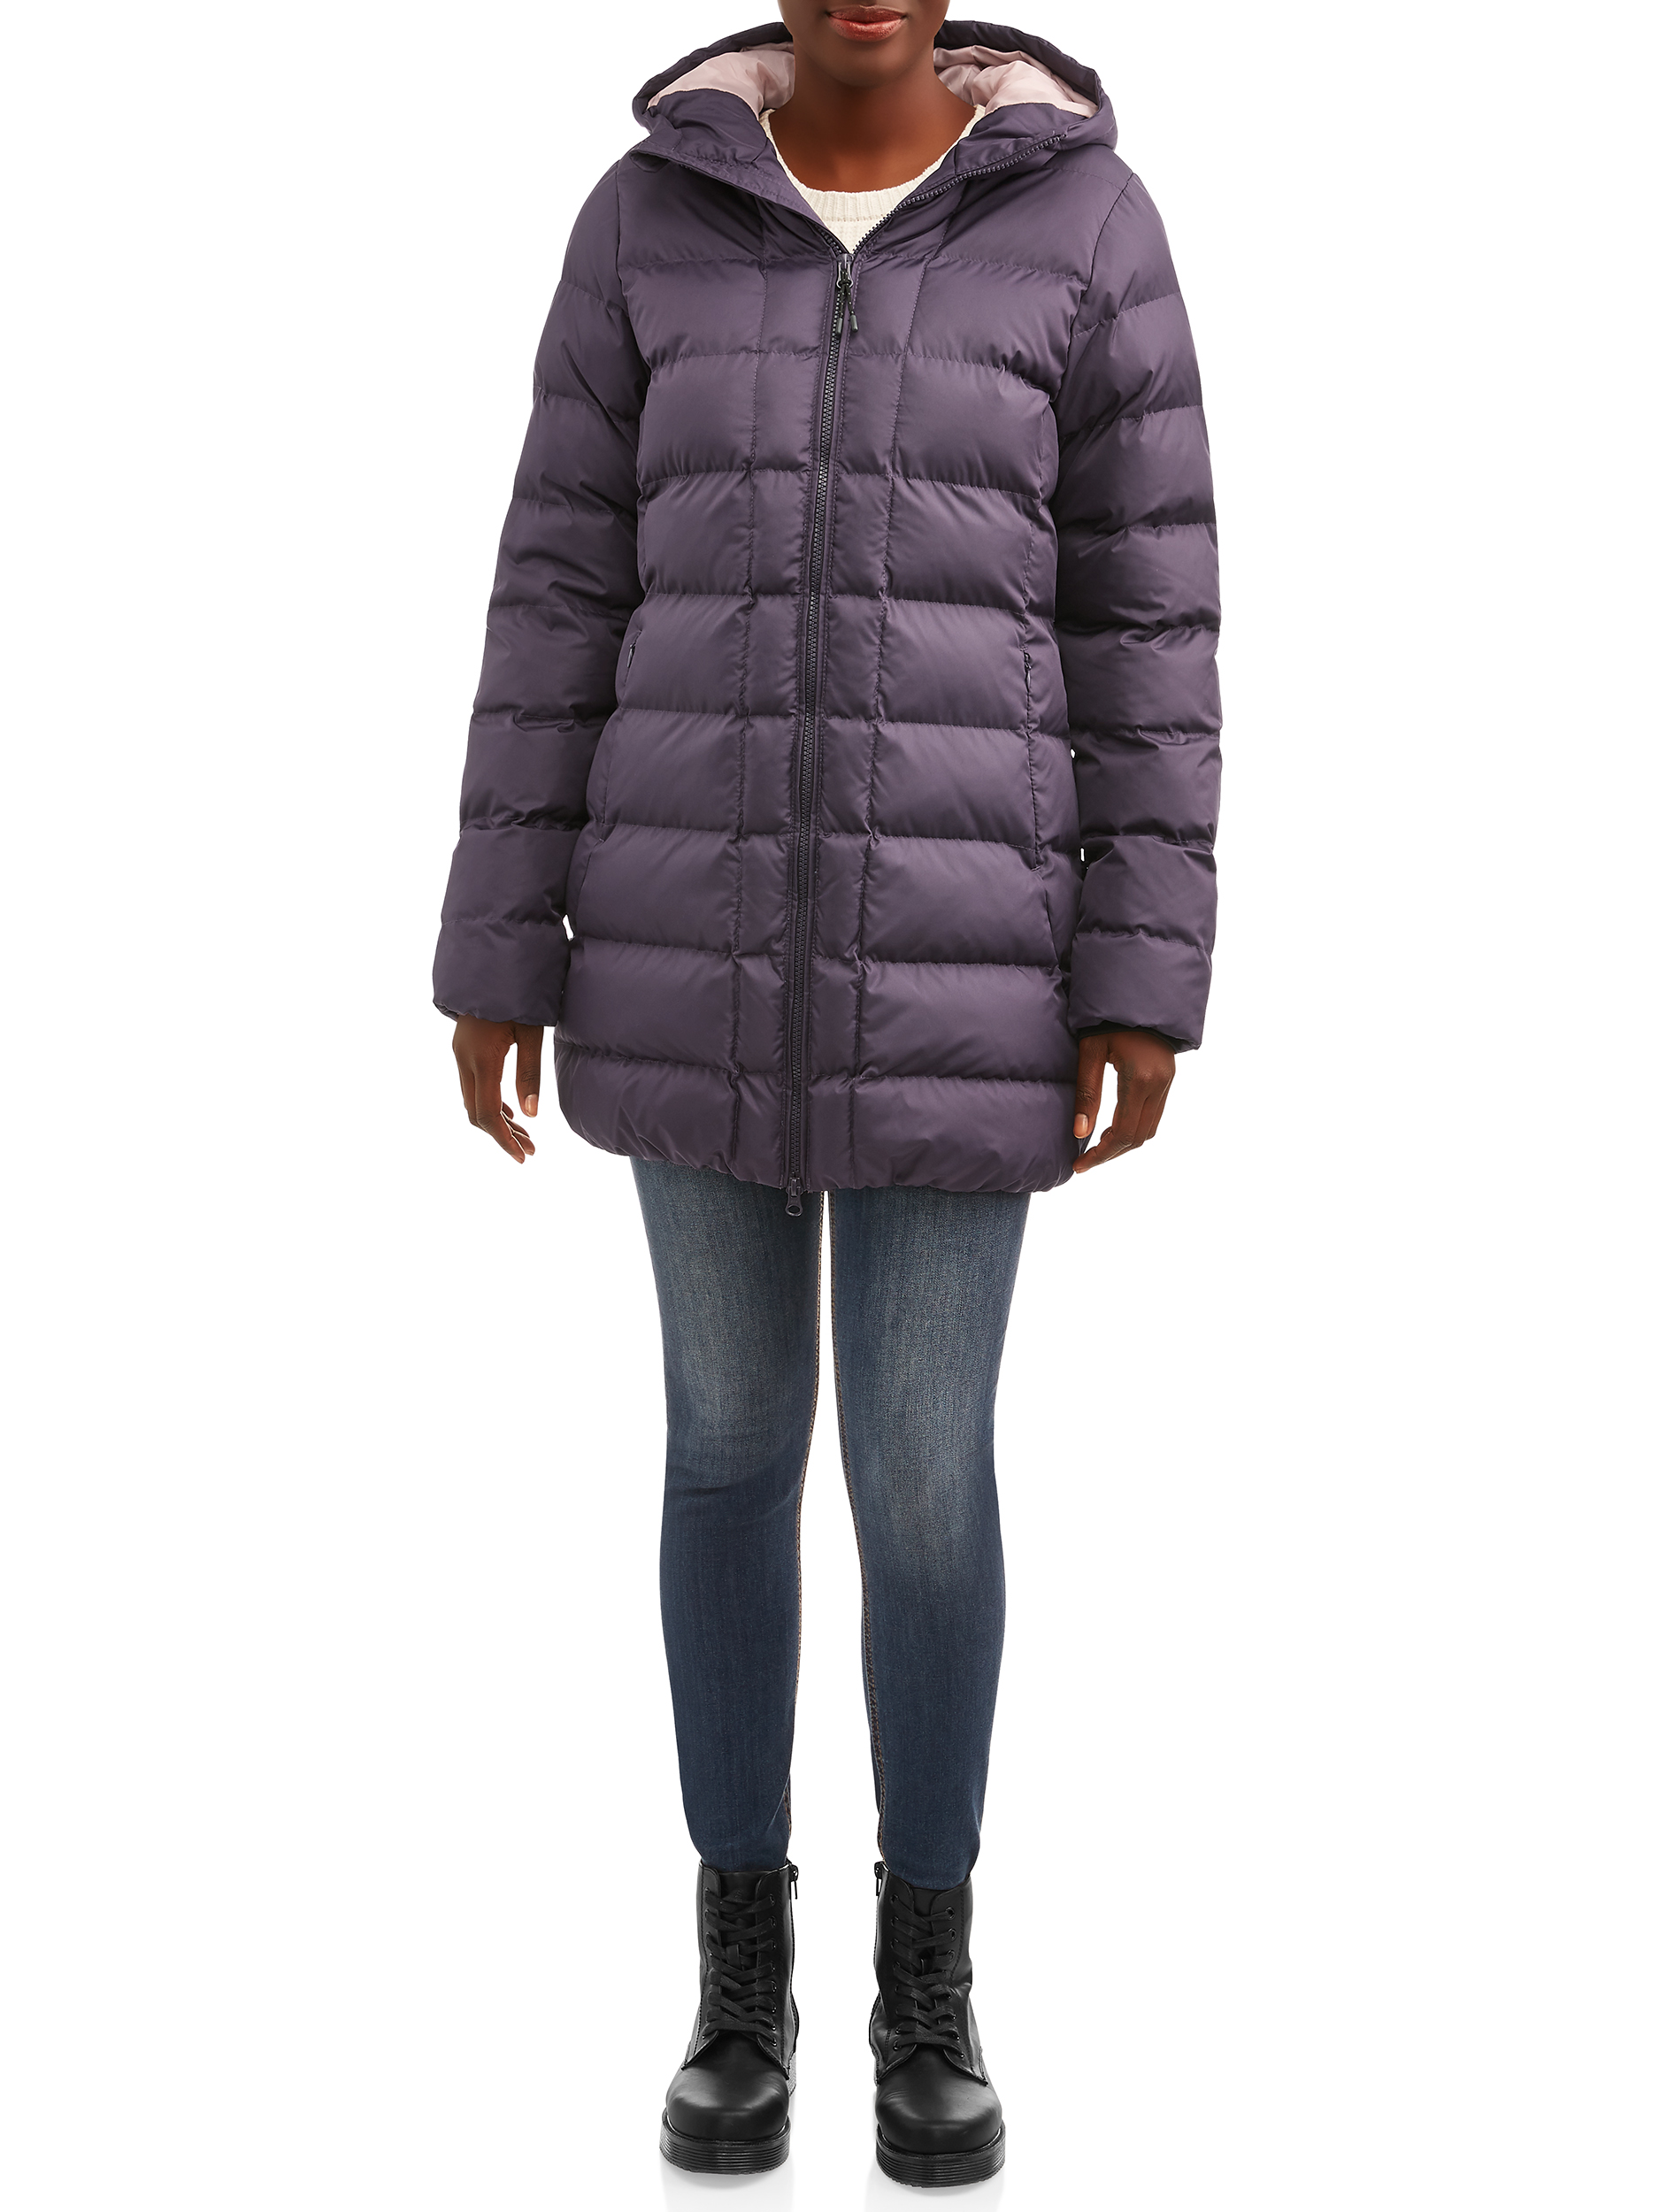 Iceburg Women's Long Insulated Parka - image 2 of 4